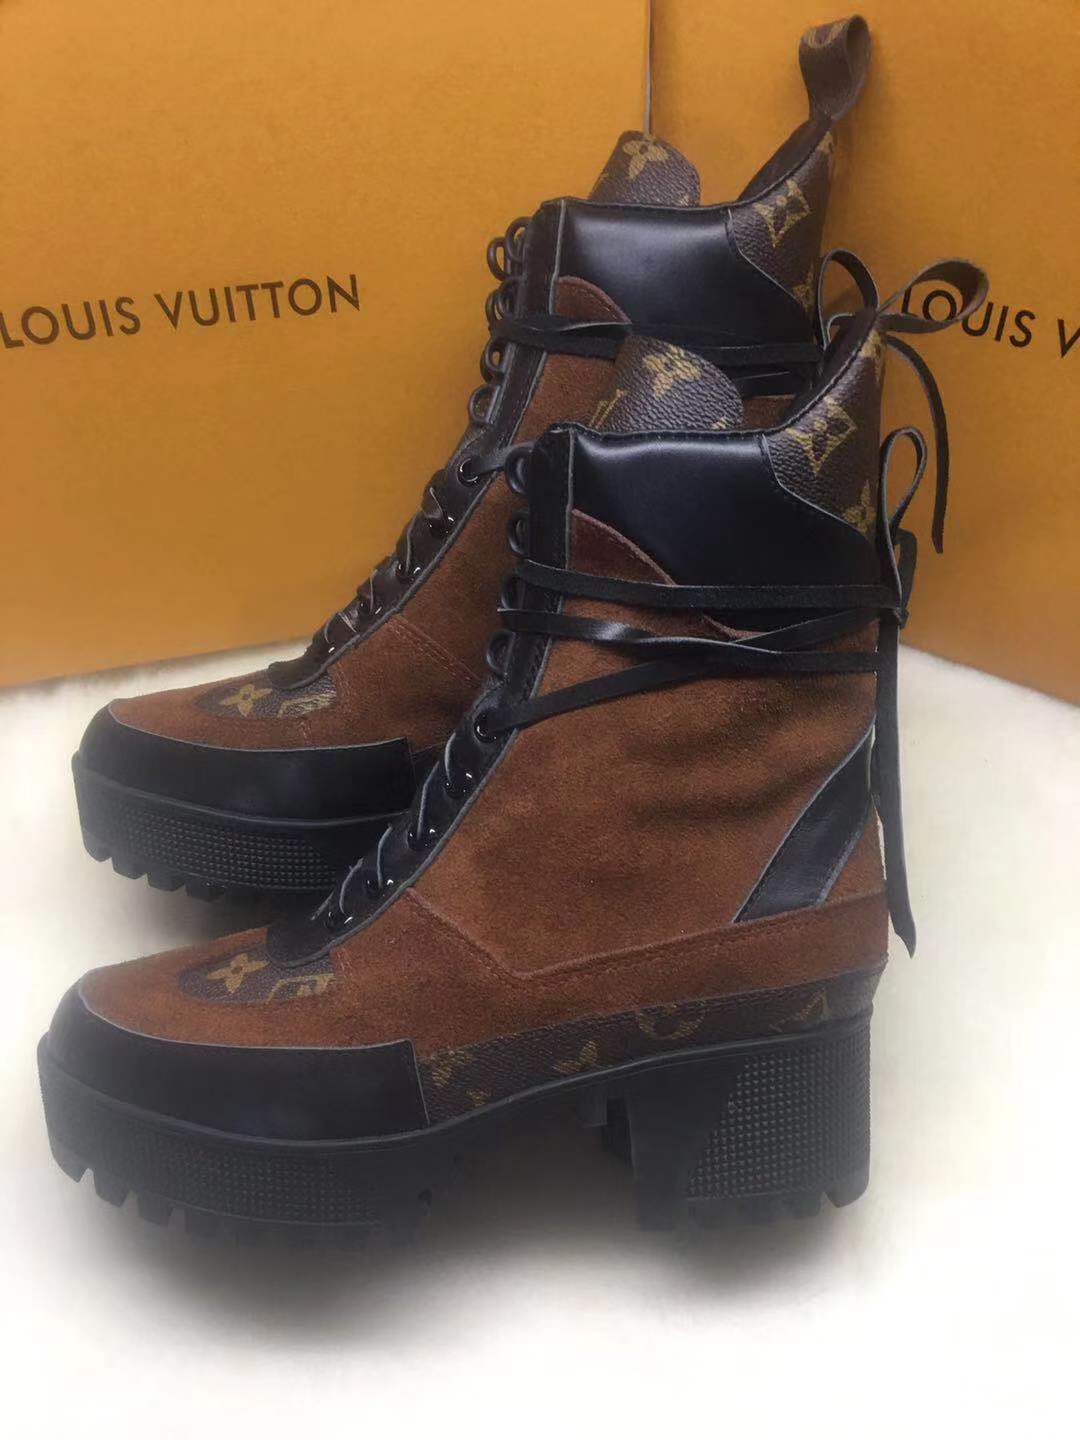 LV Louis Vuitton 2021 NEW Women's Leather Side Zip Lace-up A